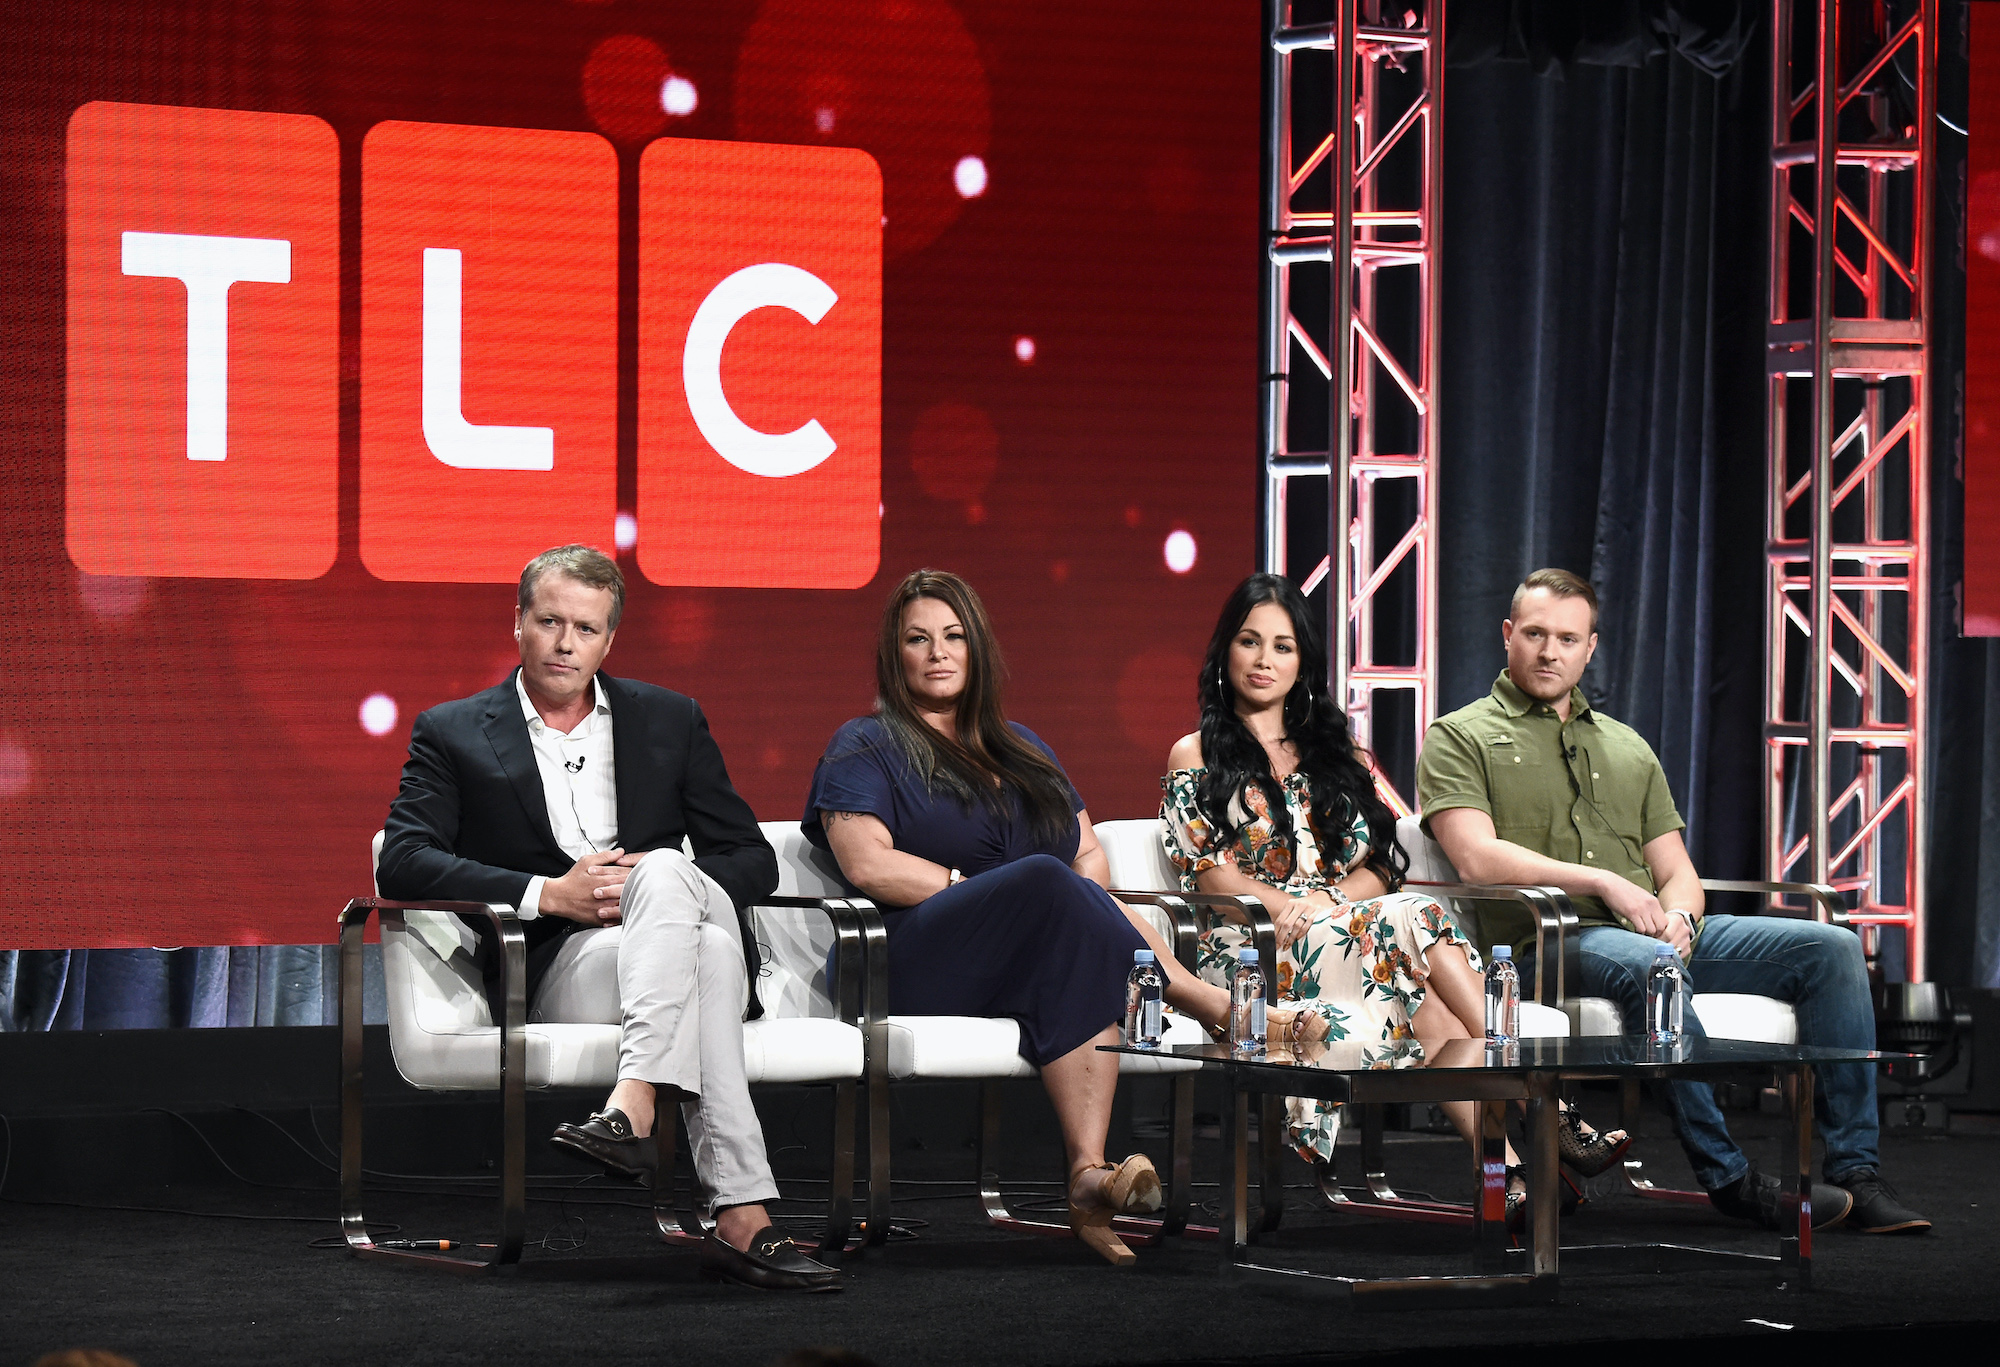 TLC executives discuss '90 Day Fiance' in front of a TLC logo